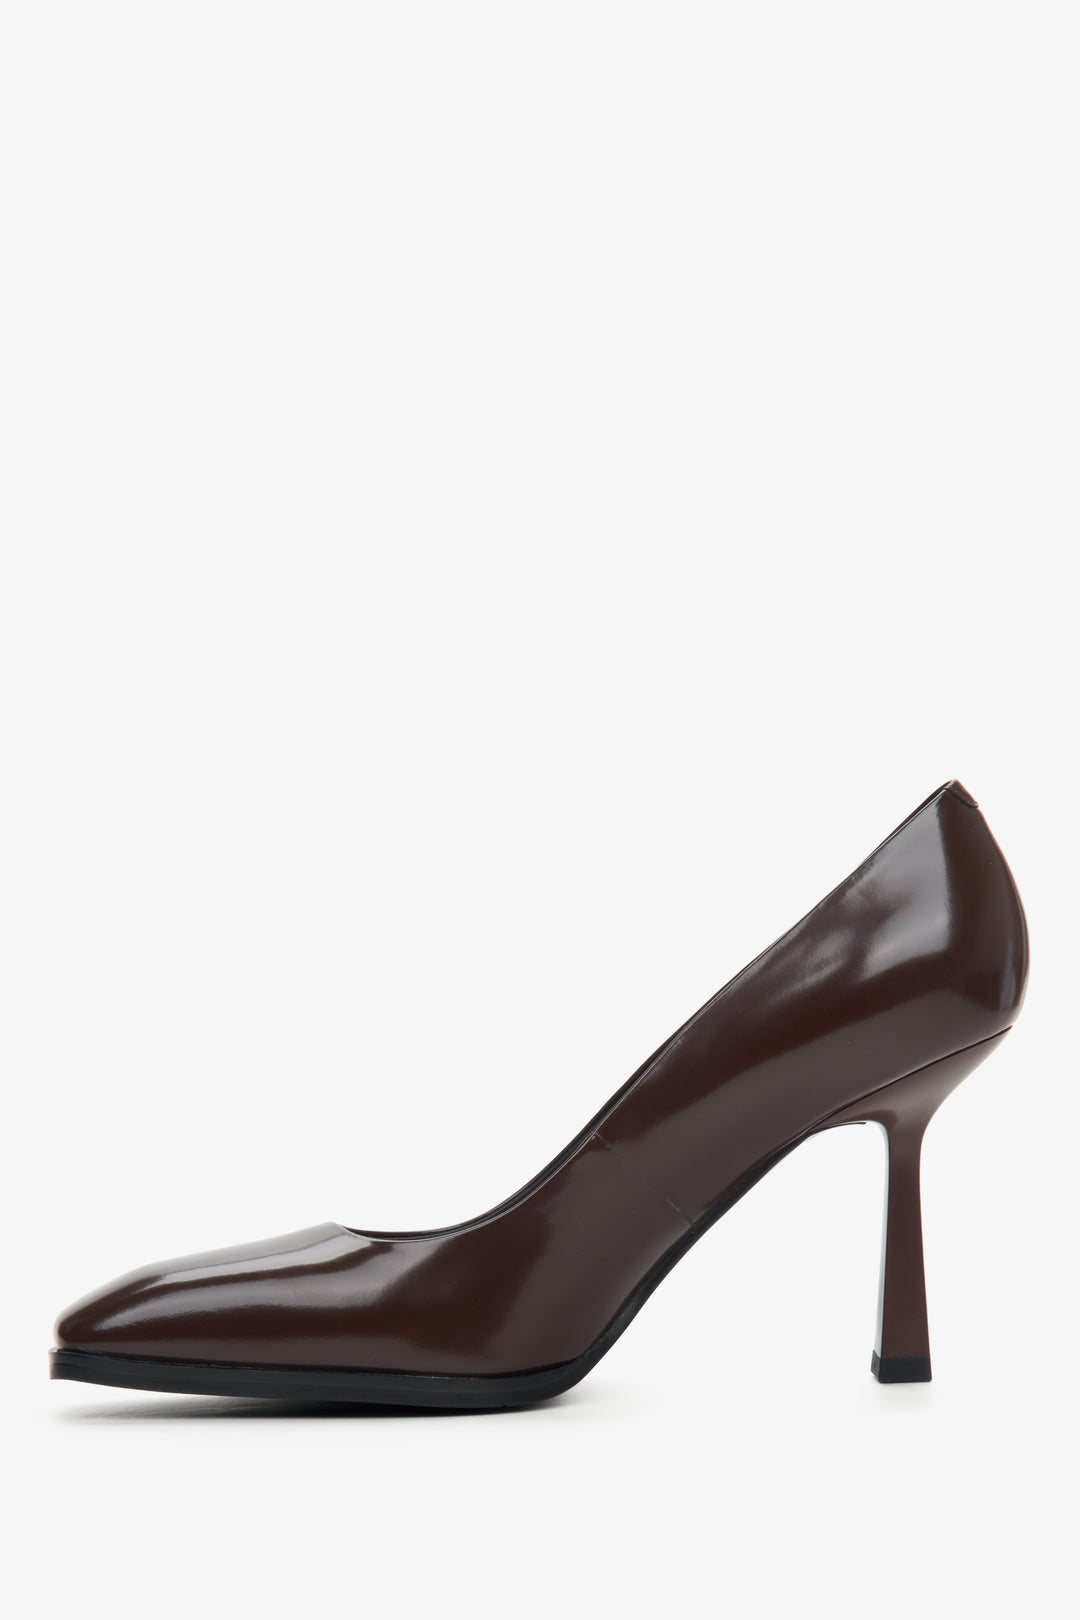 Women's dark brown leather shoes with heels - side profile of the shoe.